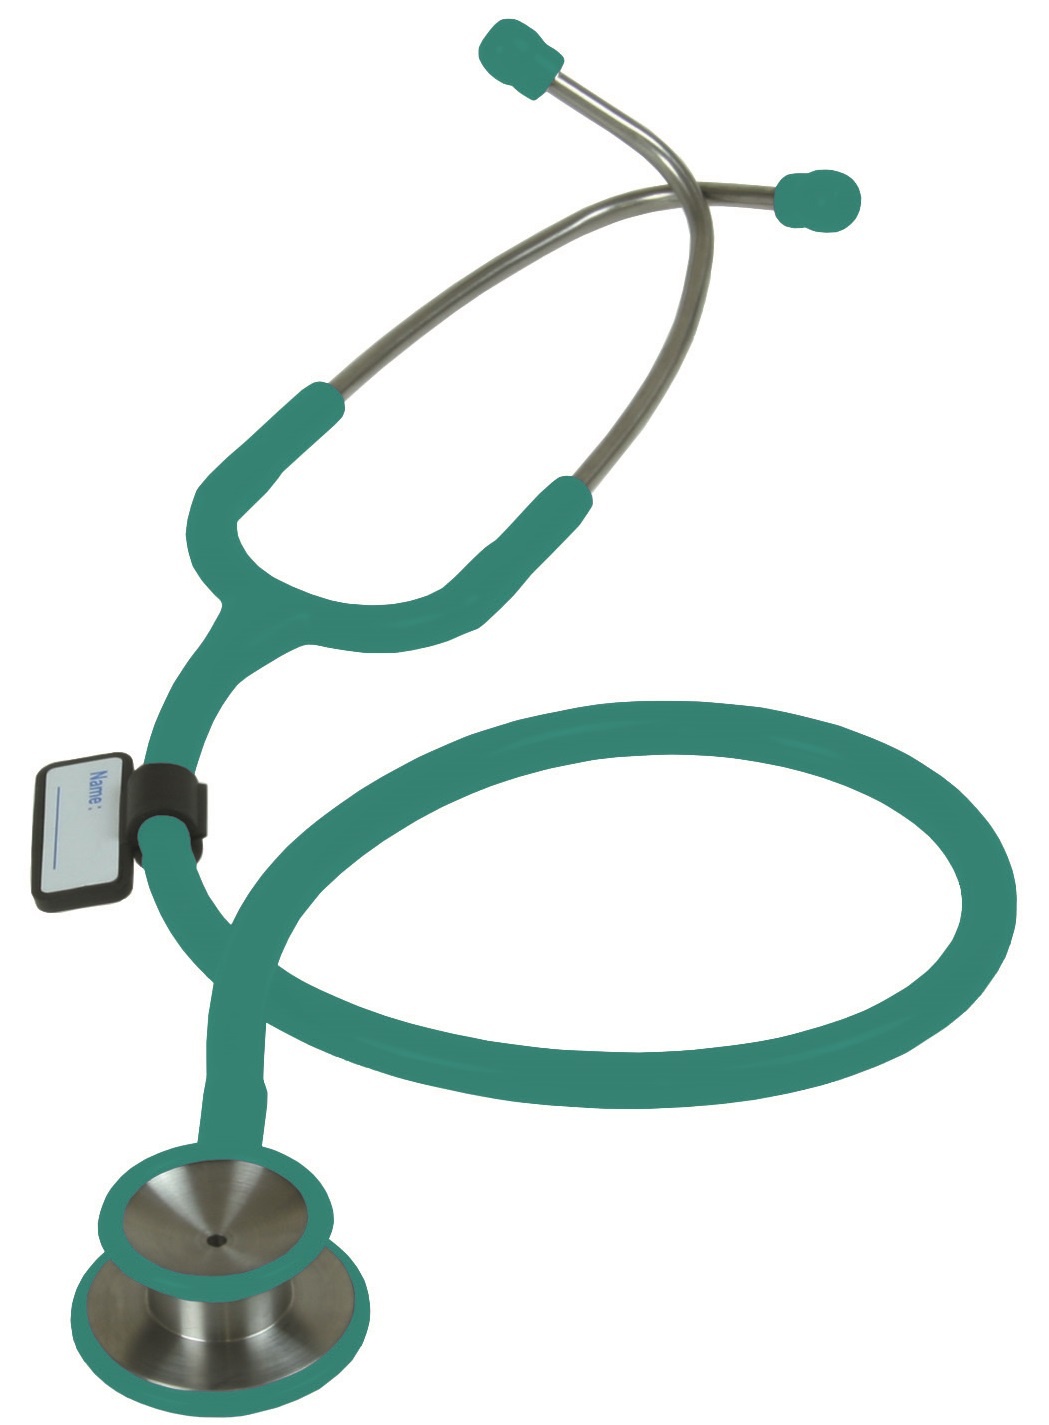 Liberty Stethoscope Classic - Teal image 0